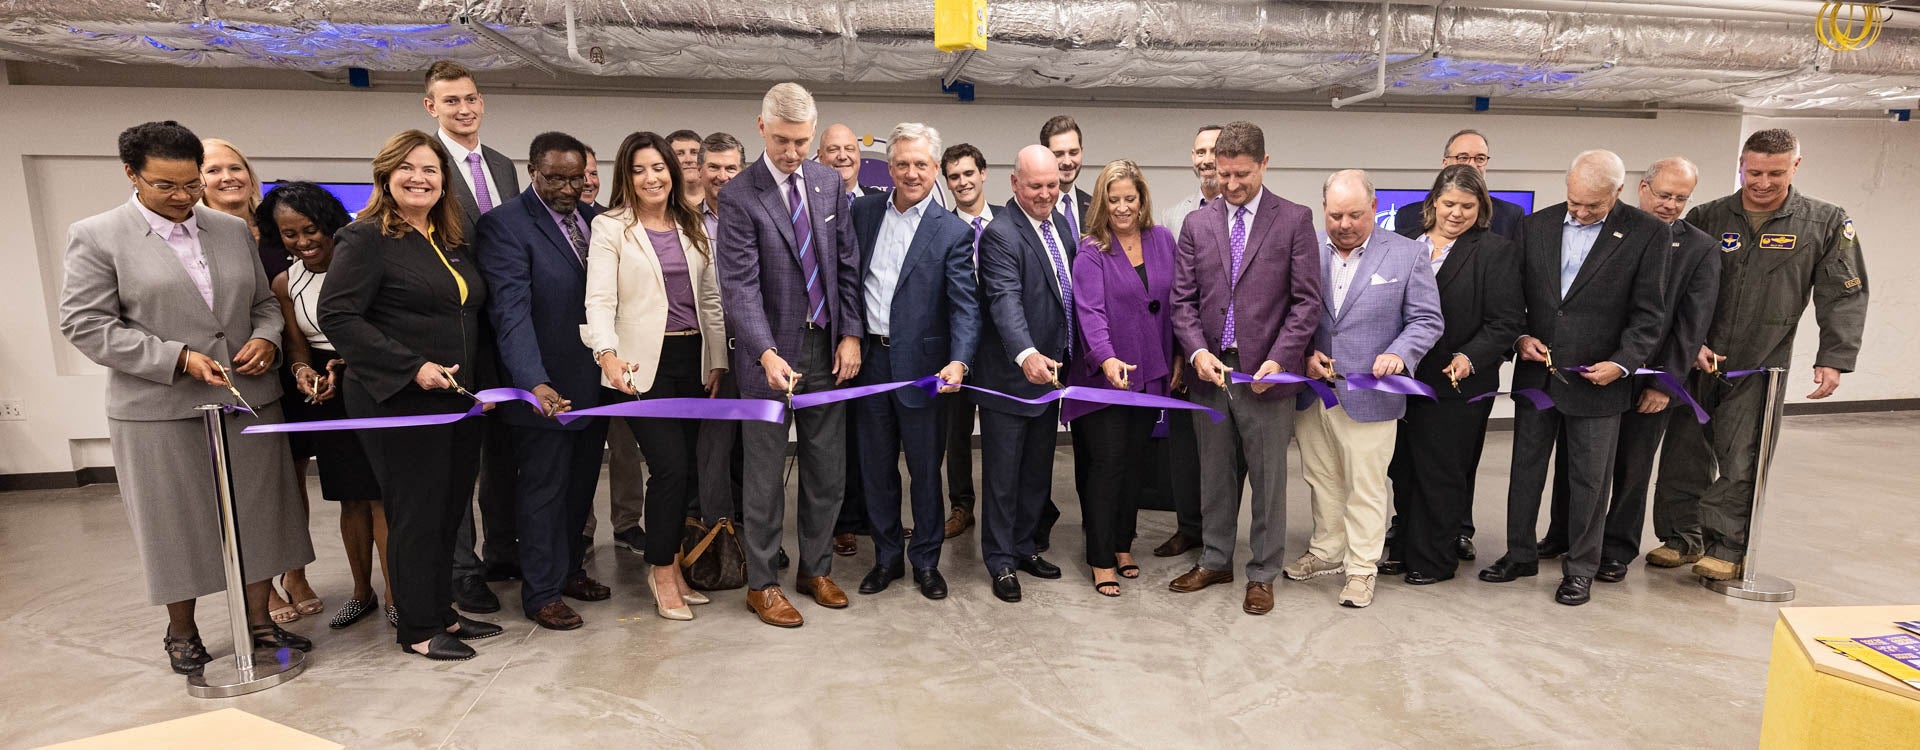 ECU officials and friends celebrated the official opening and ribbon cutting for the Isley Innovation Hub. 